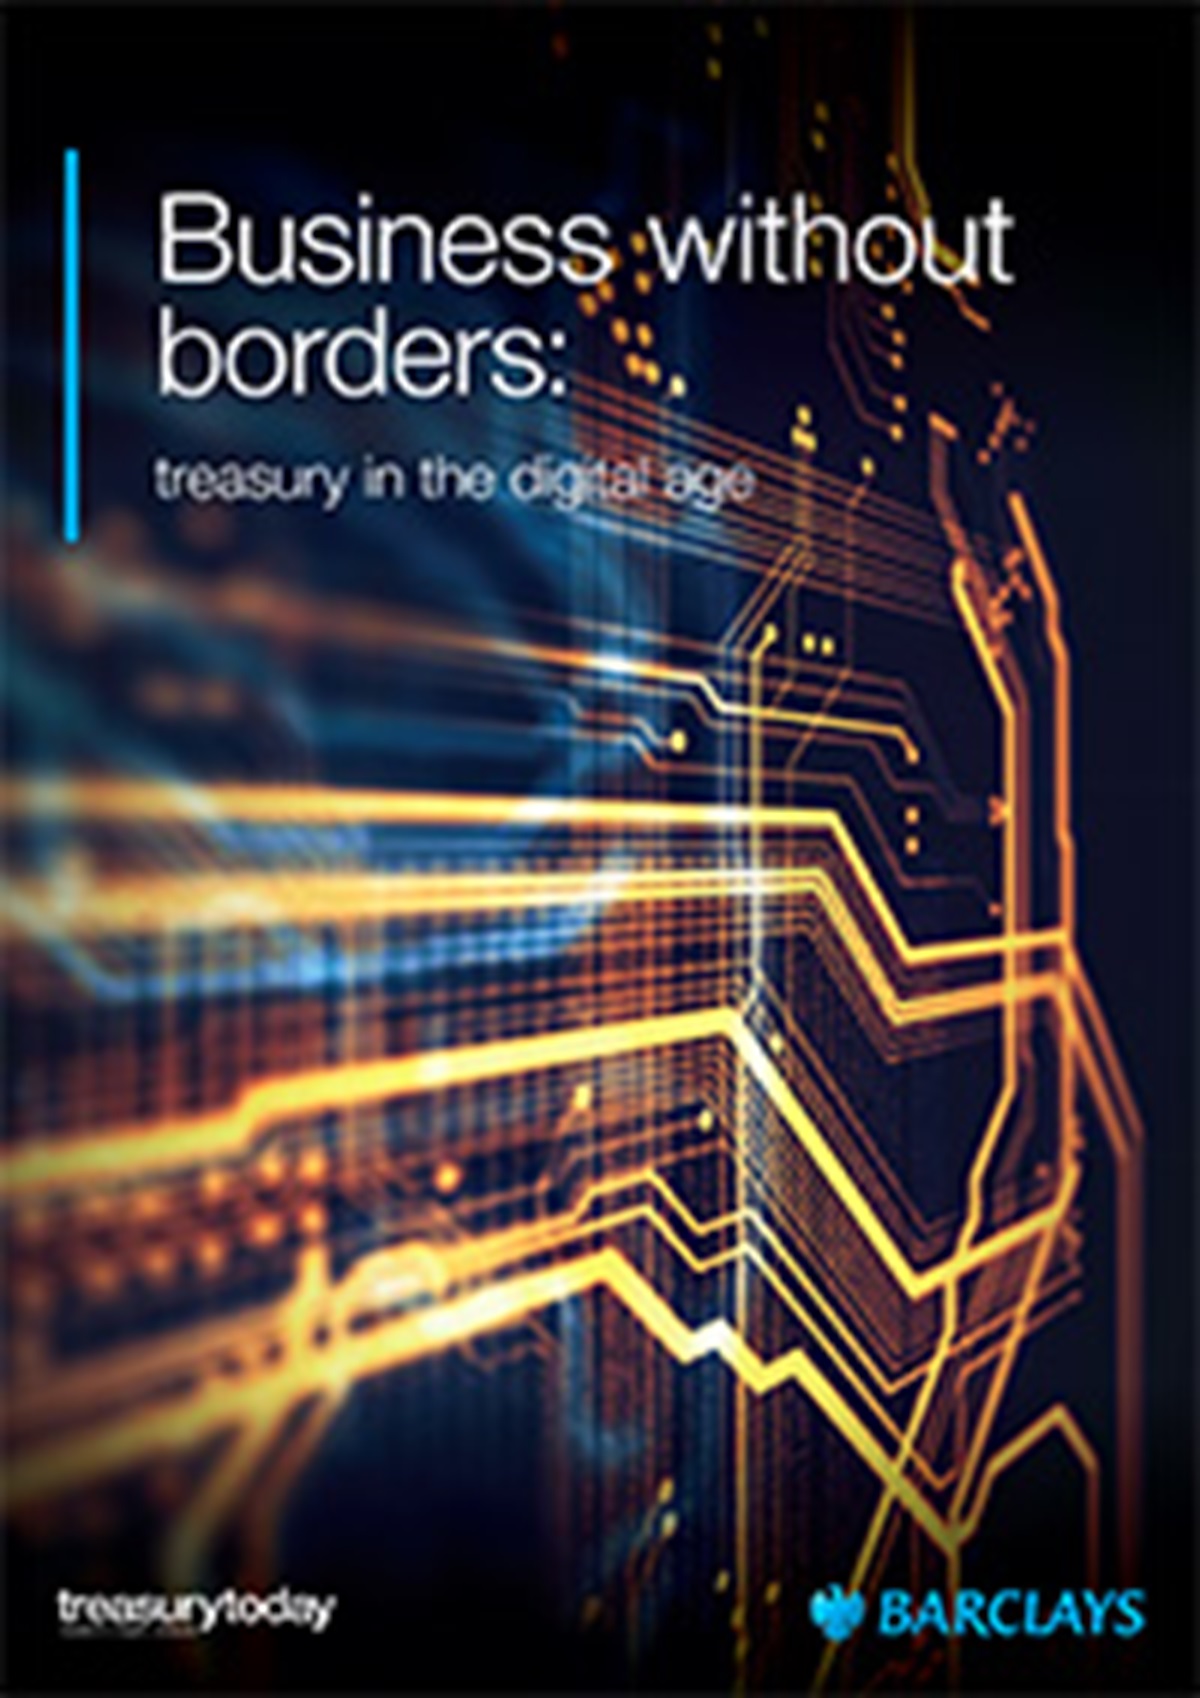 Business without borders: treasury in the digital age